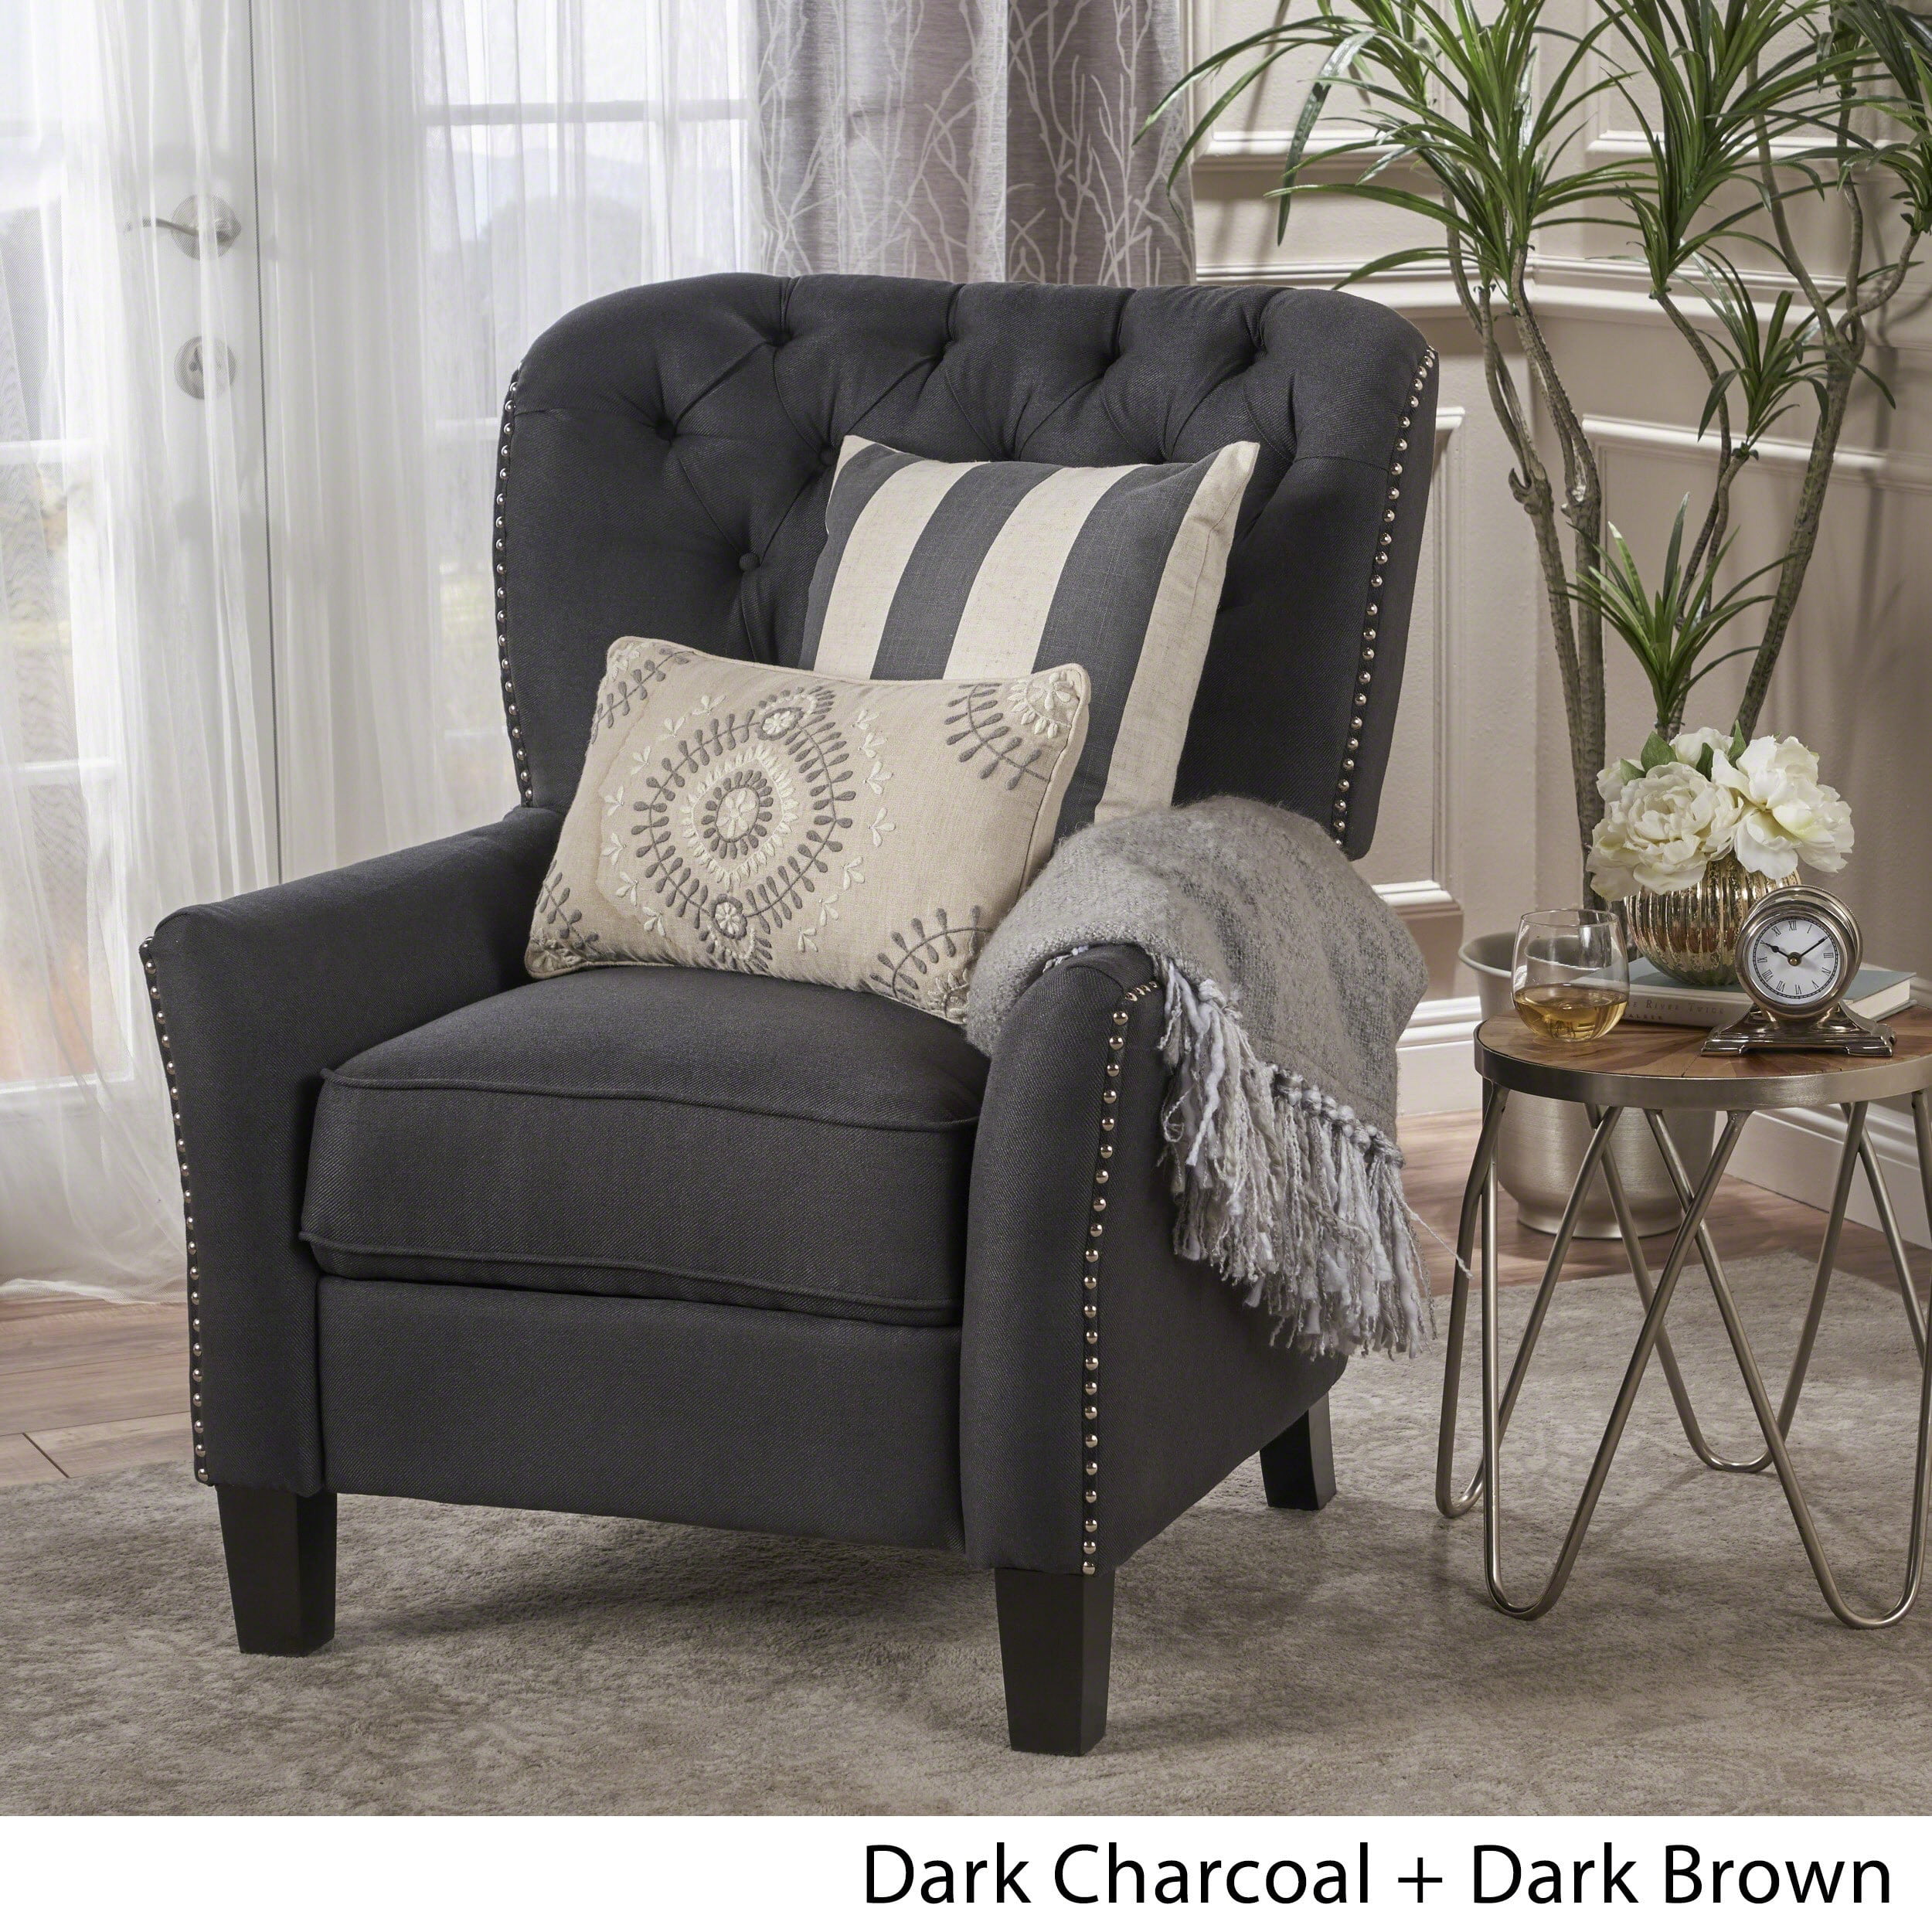 Dark Brown Christopher Knight Home Cerelia Tufted Fabric Recliner Dark Charcoal 